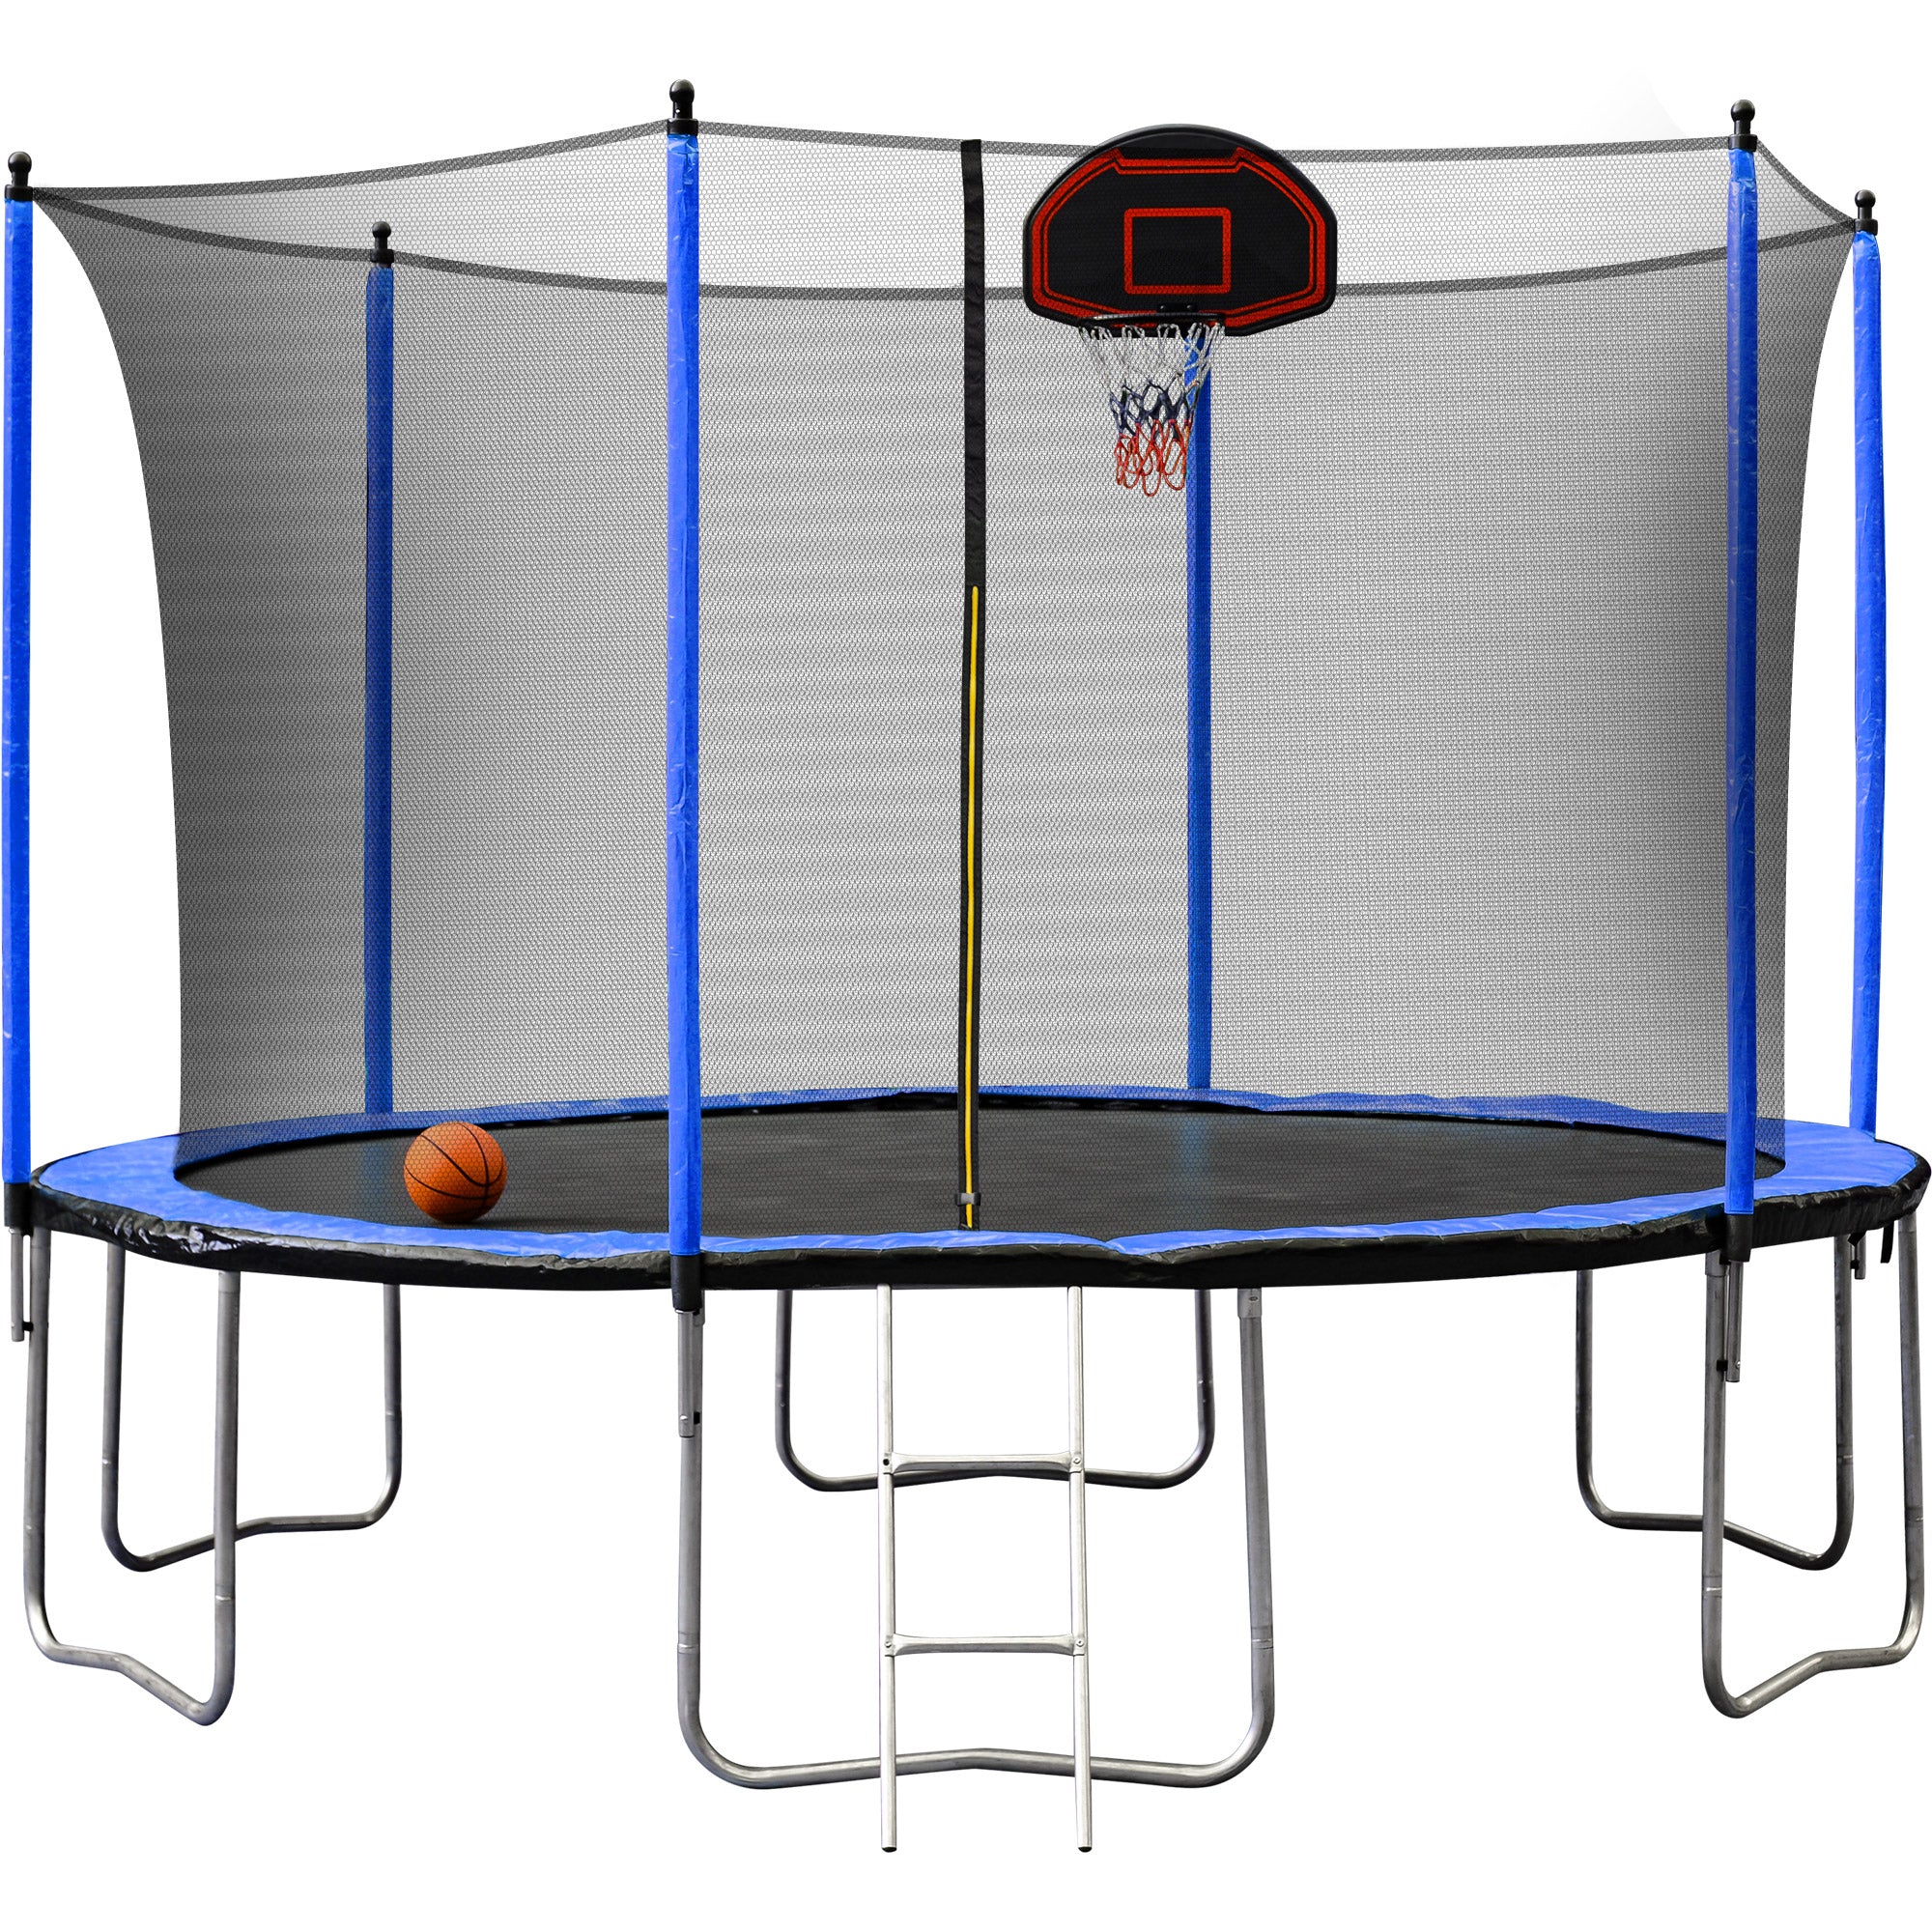 Yc 14ft Trampoline with Basketball Hoop Inflator